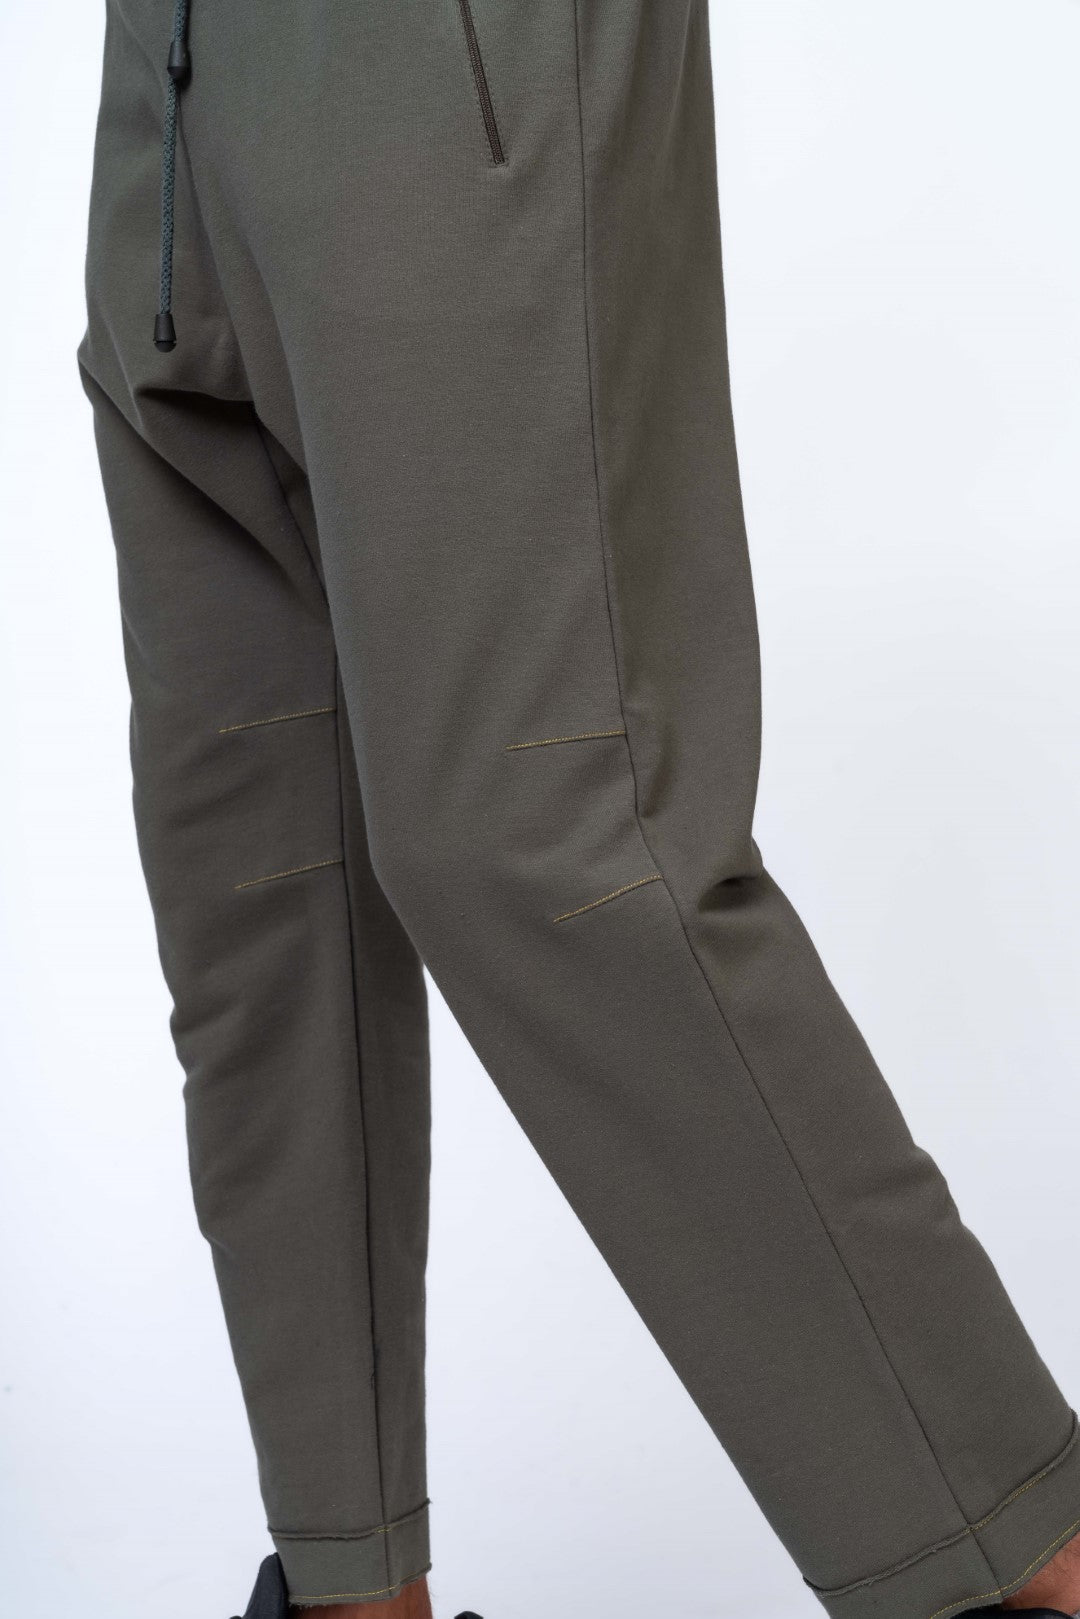 Joggers Trousers with Back Pocket and Drawstrings